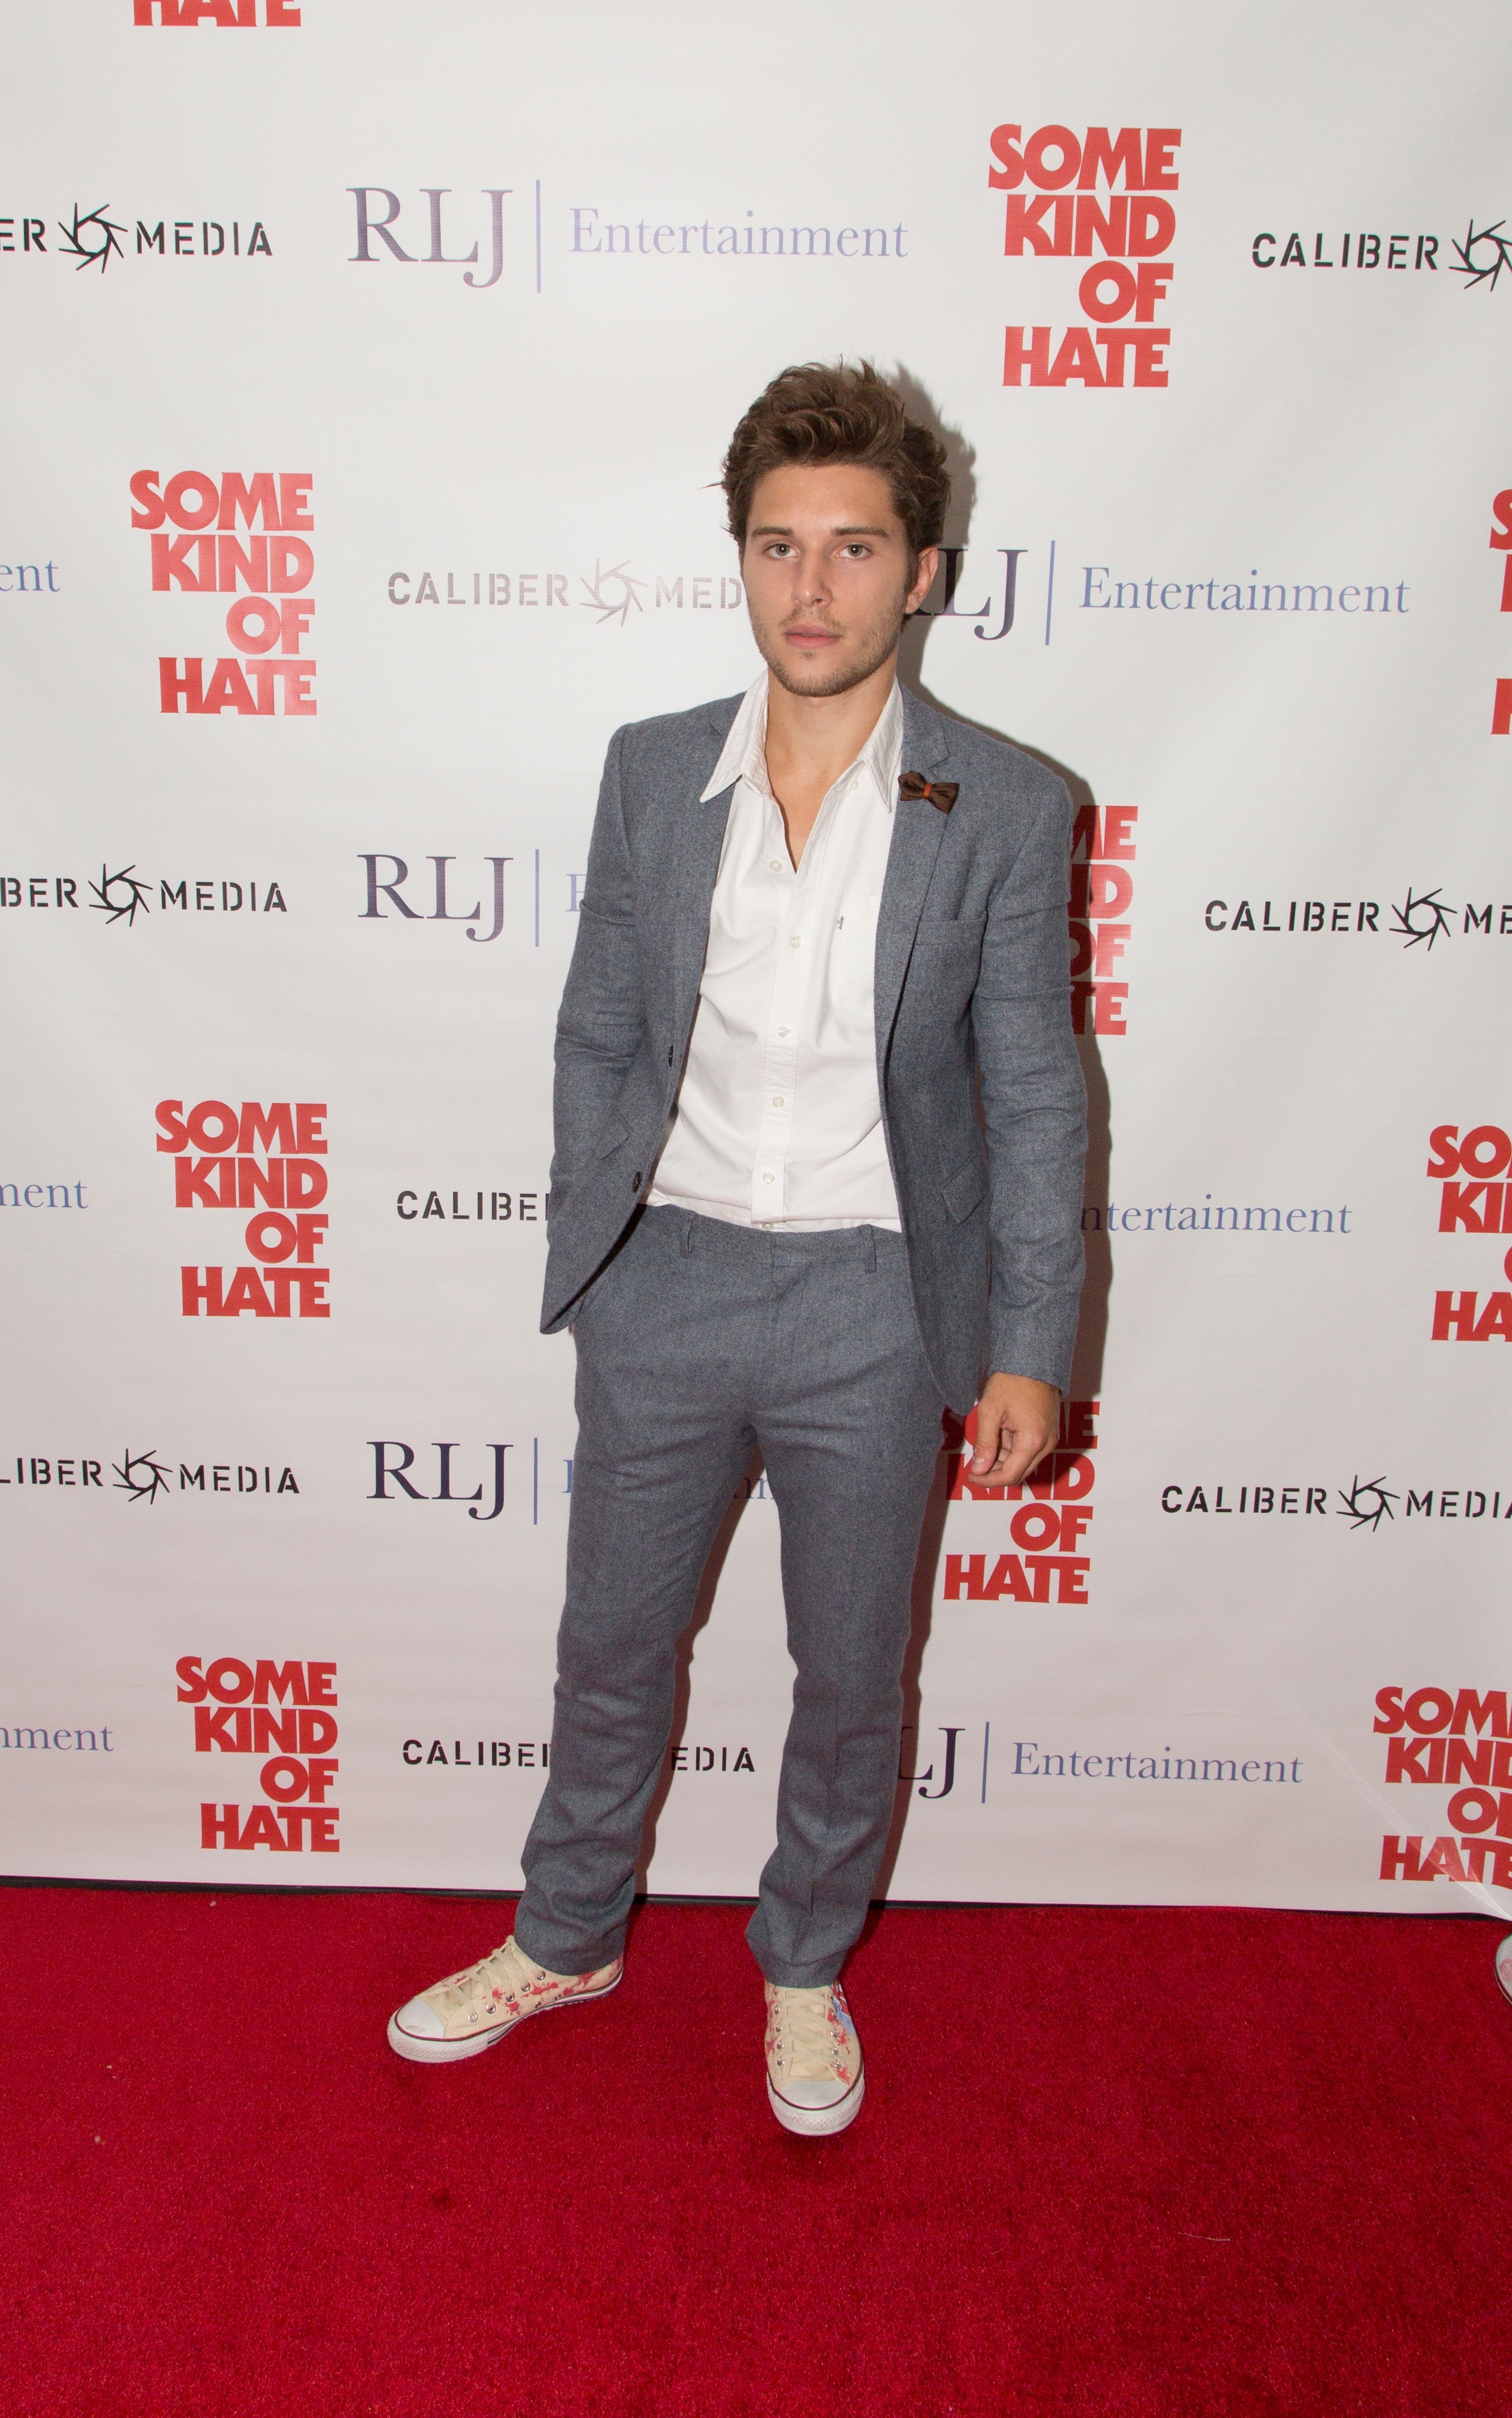 Ronen Rubinstein at the Theatrical Release of Some Kind of Hate in New York City.